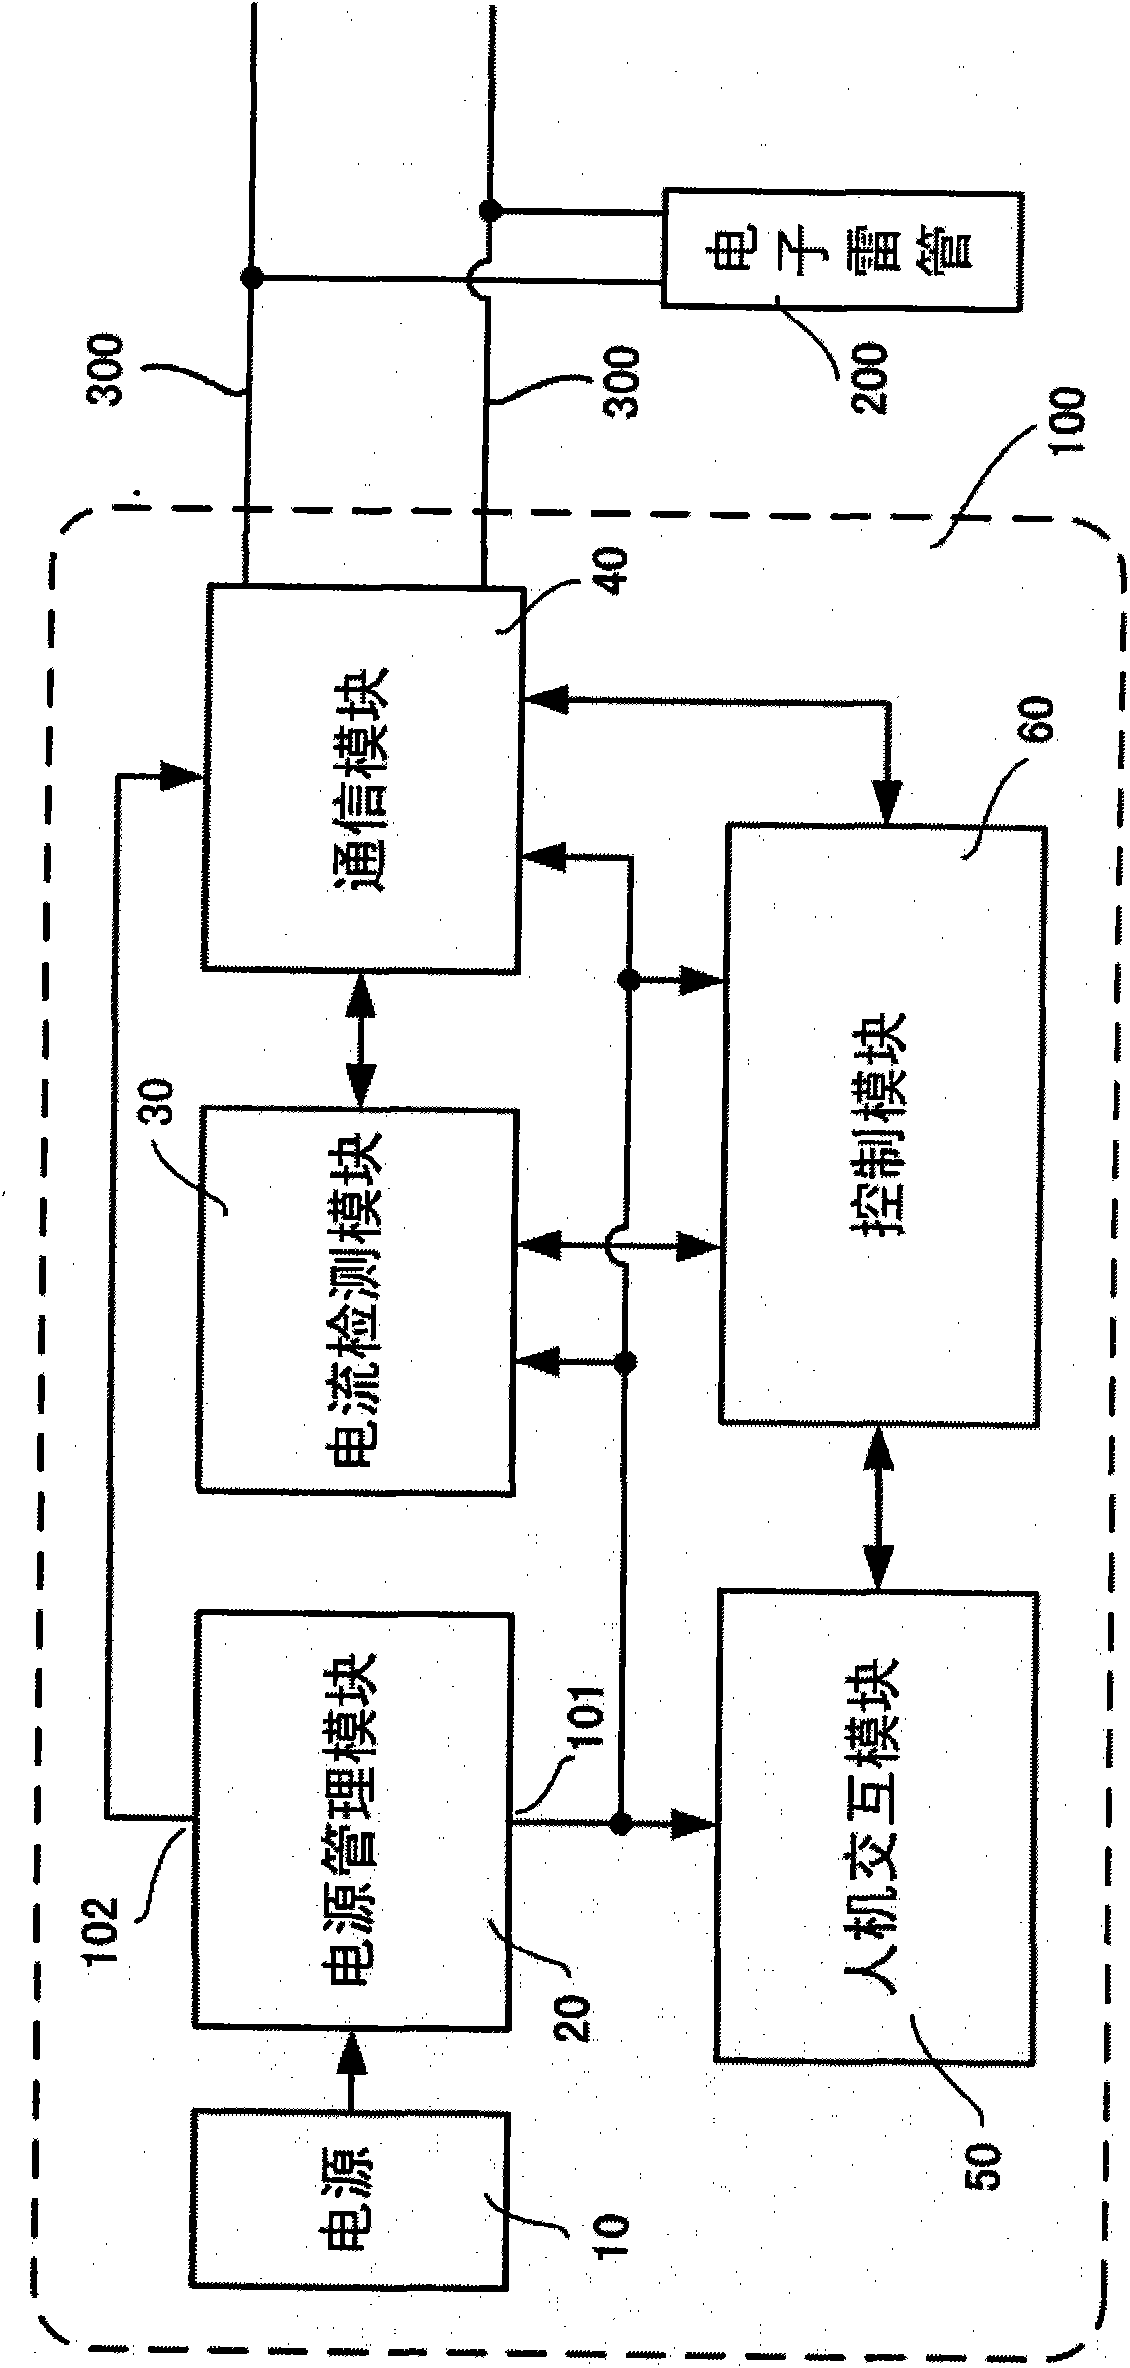 Detection control flow of special equipment for electronic detonator